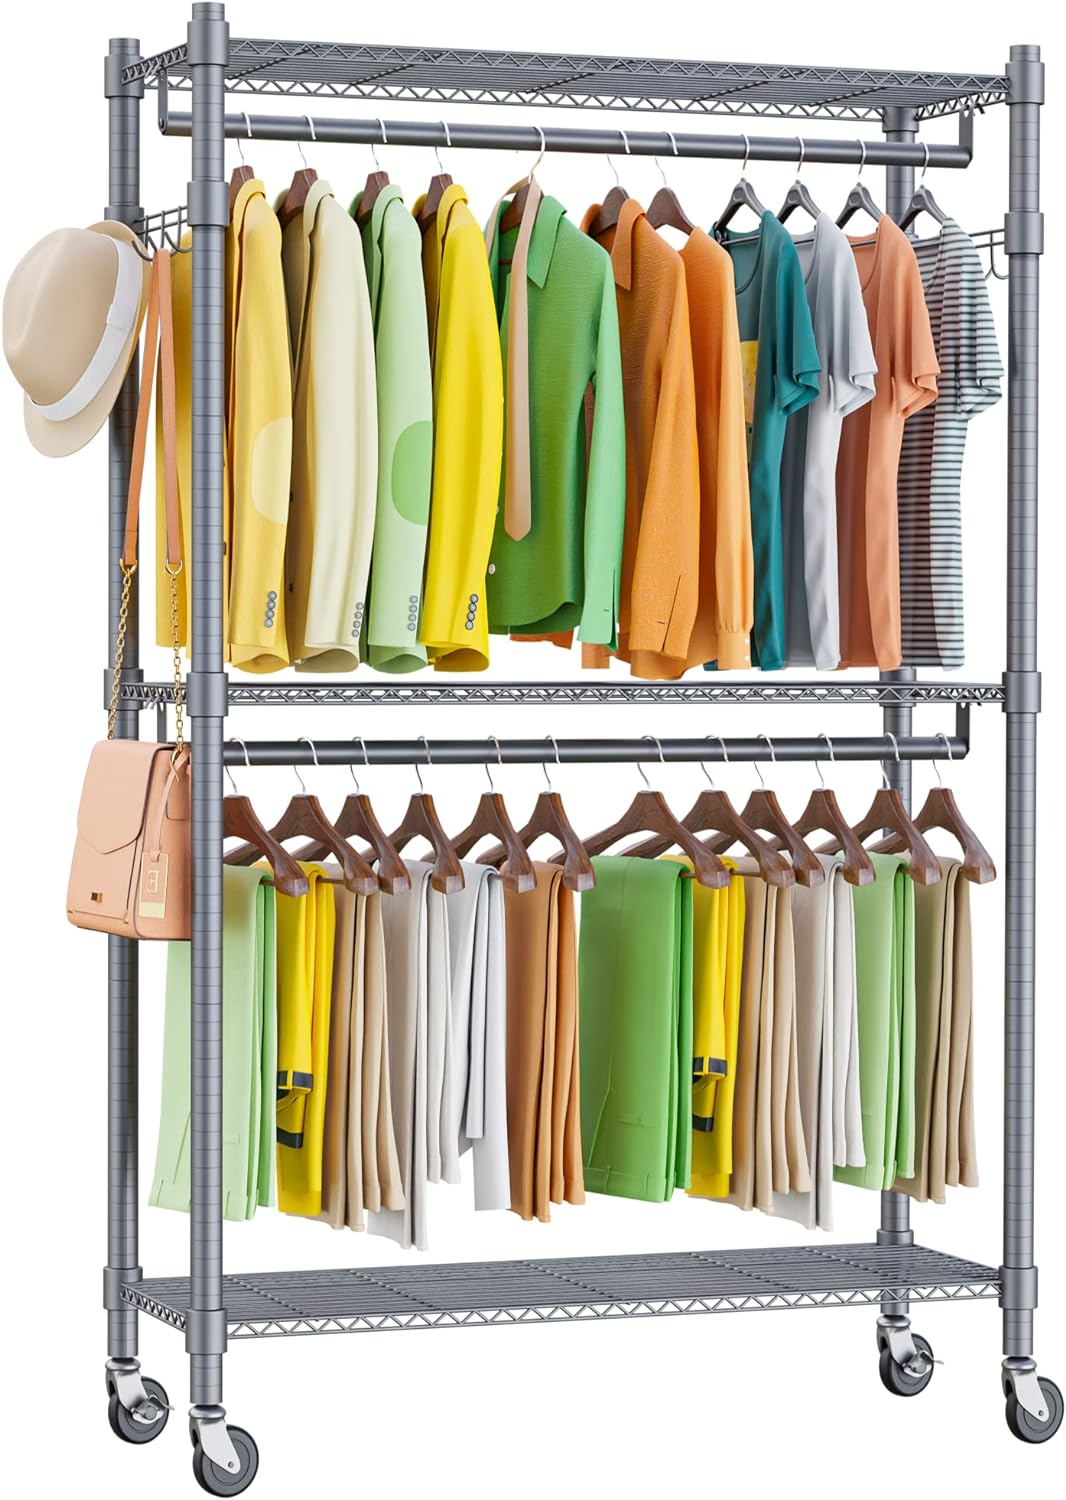 Portable Clothes Rack, Heavy Duty Hanging Garment Rack with Wheels and Side Hooks, 3 Shelves Wire Shelving Rack with Hanger Rods, Freestanding Closet